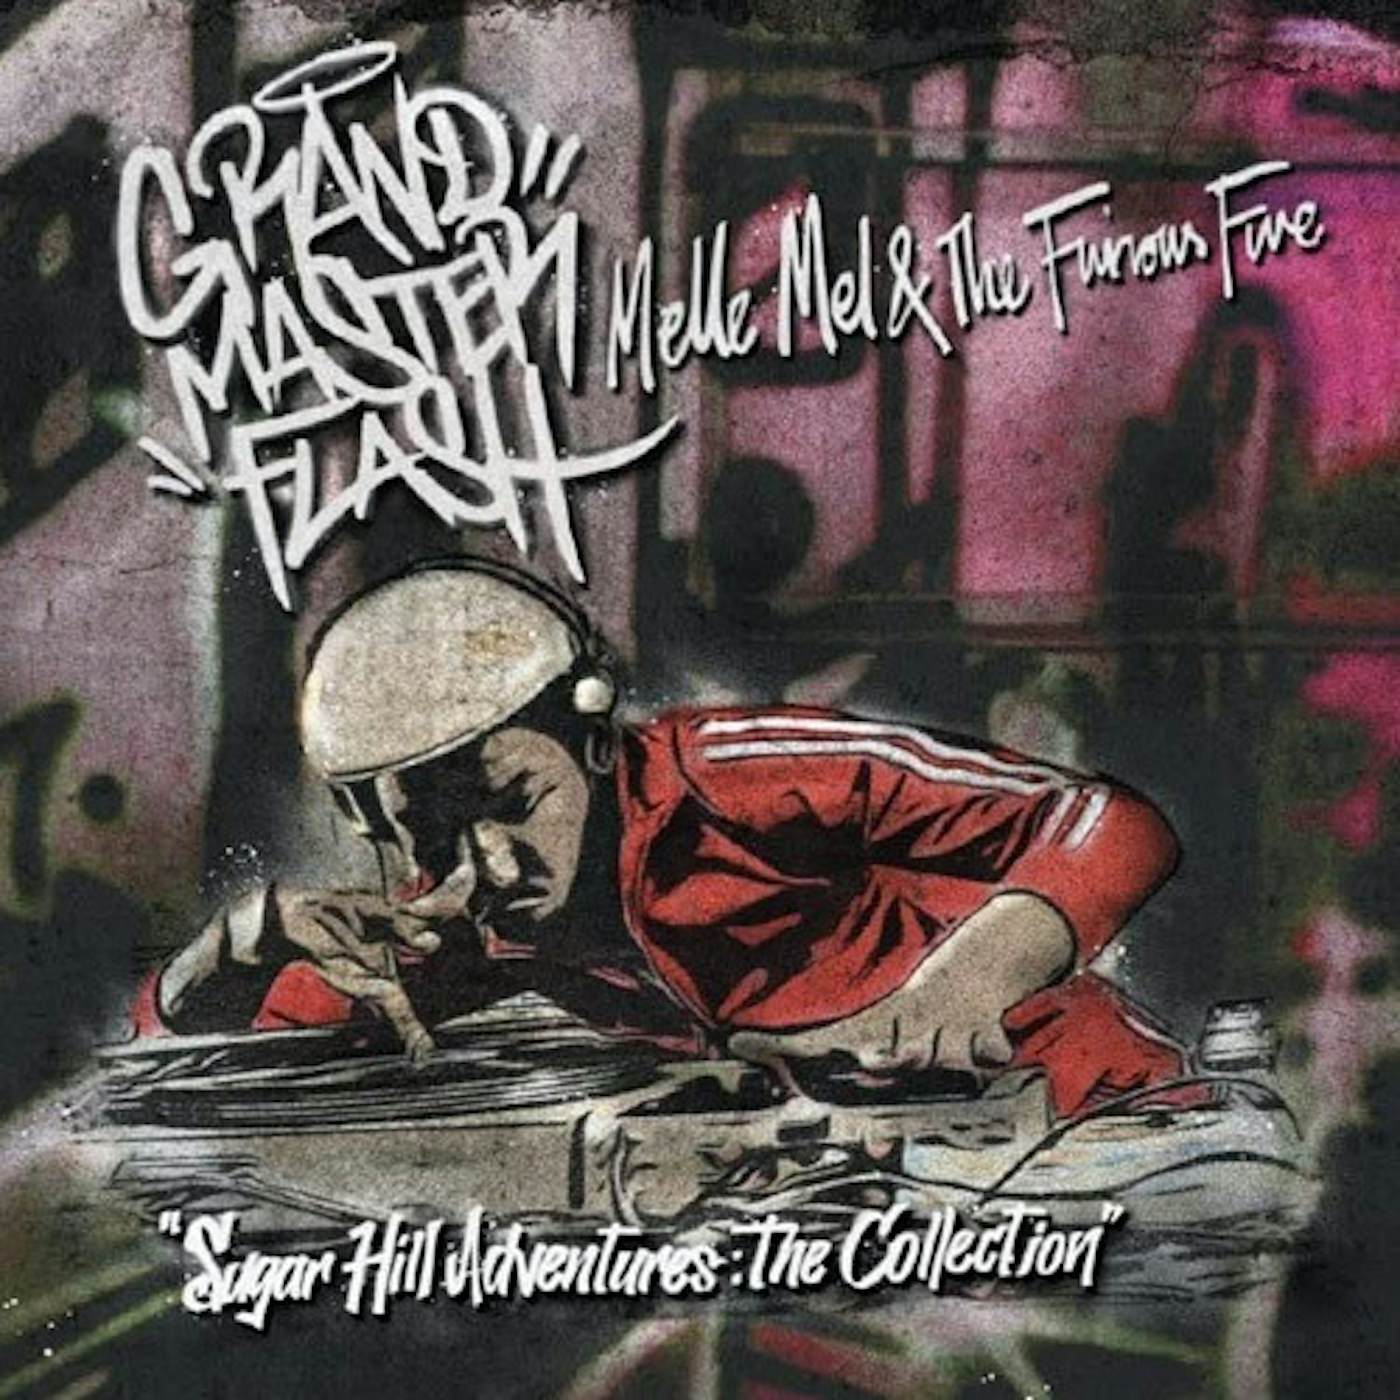 Grandmaster Flash & The Furious Five SUGARHILL ADVENTURES: COLLECTION CD